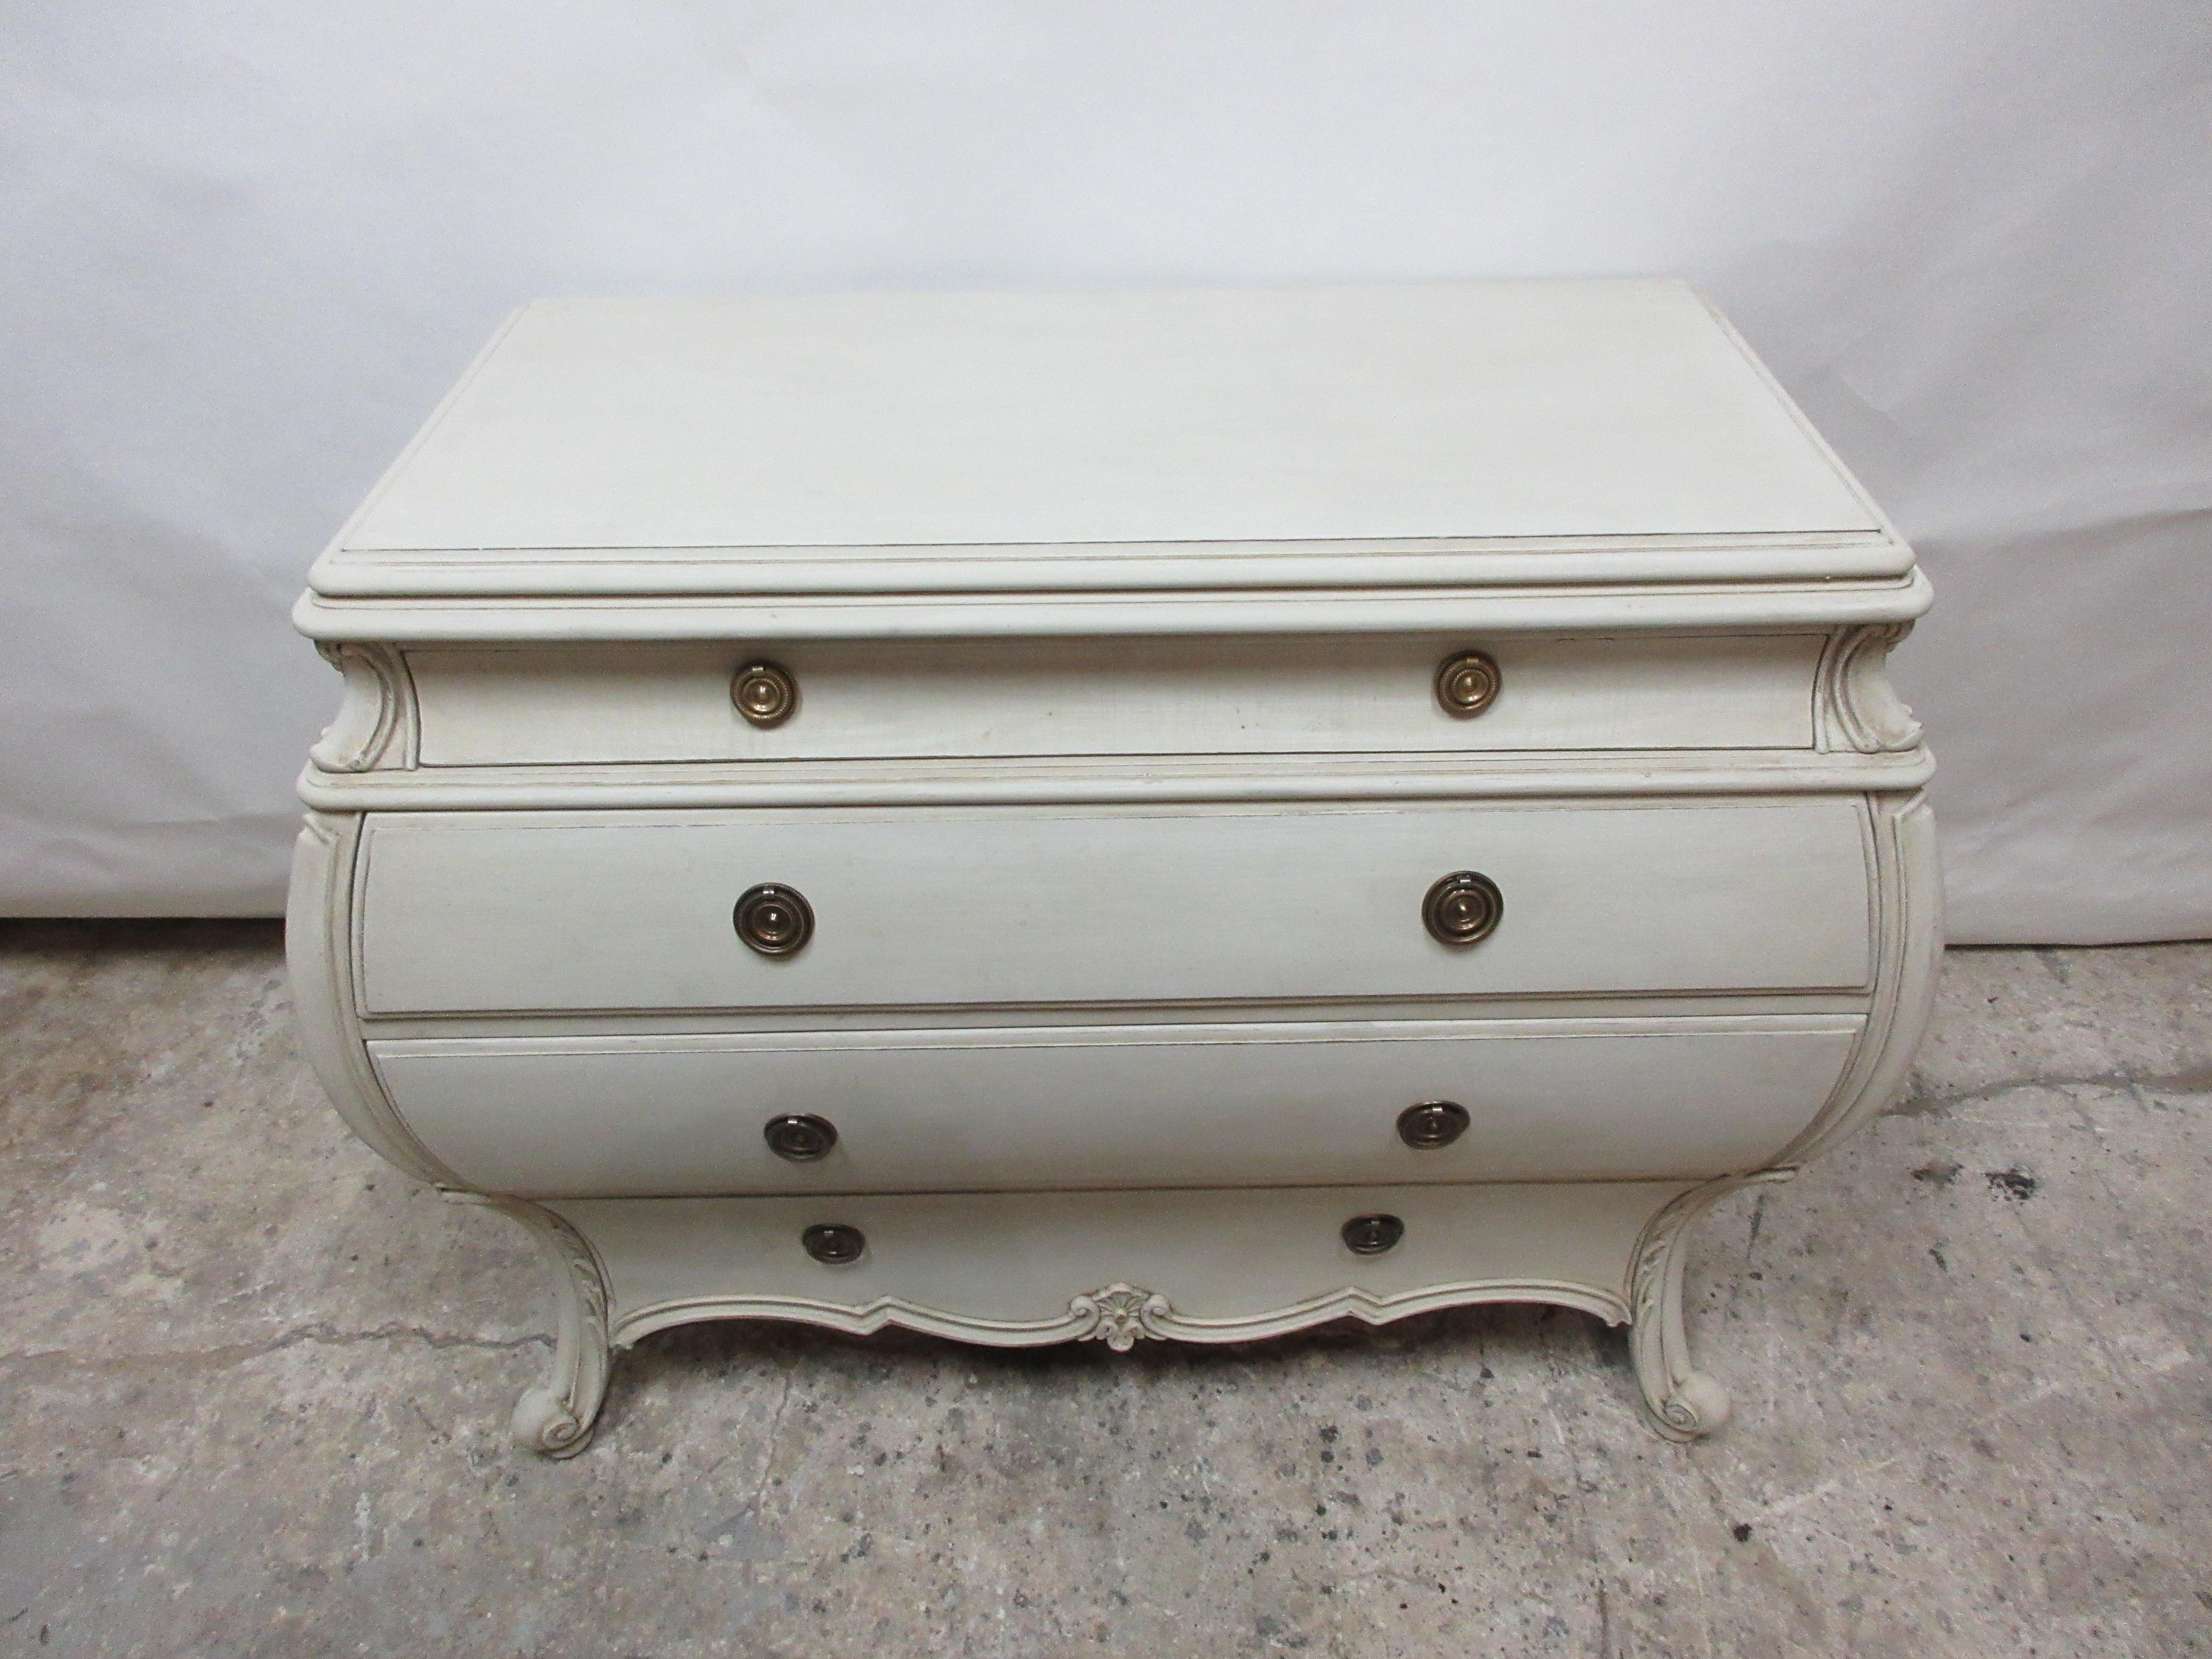 This is a Bombay chest of drawers. It has been restored and repainted with milk paints 